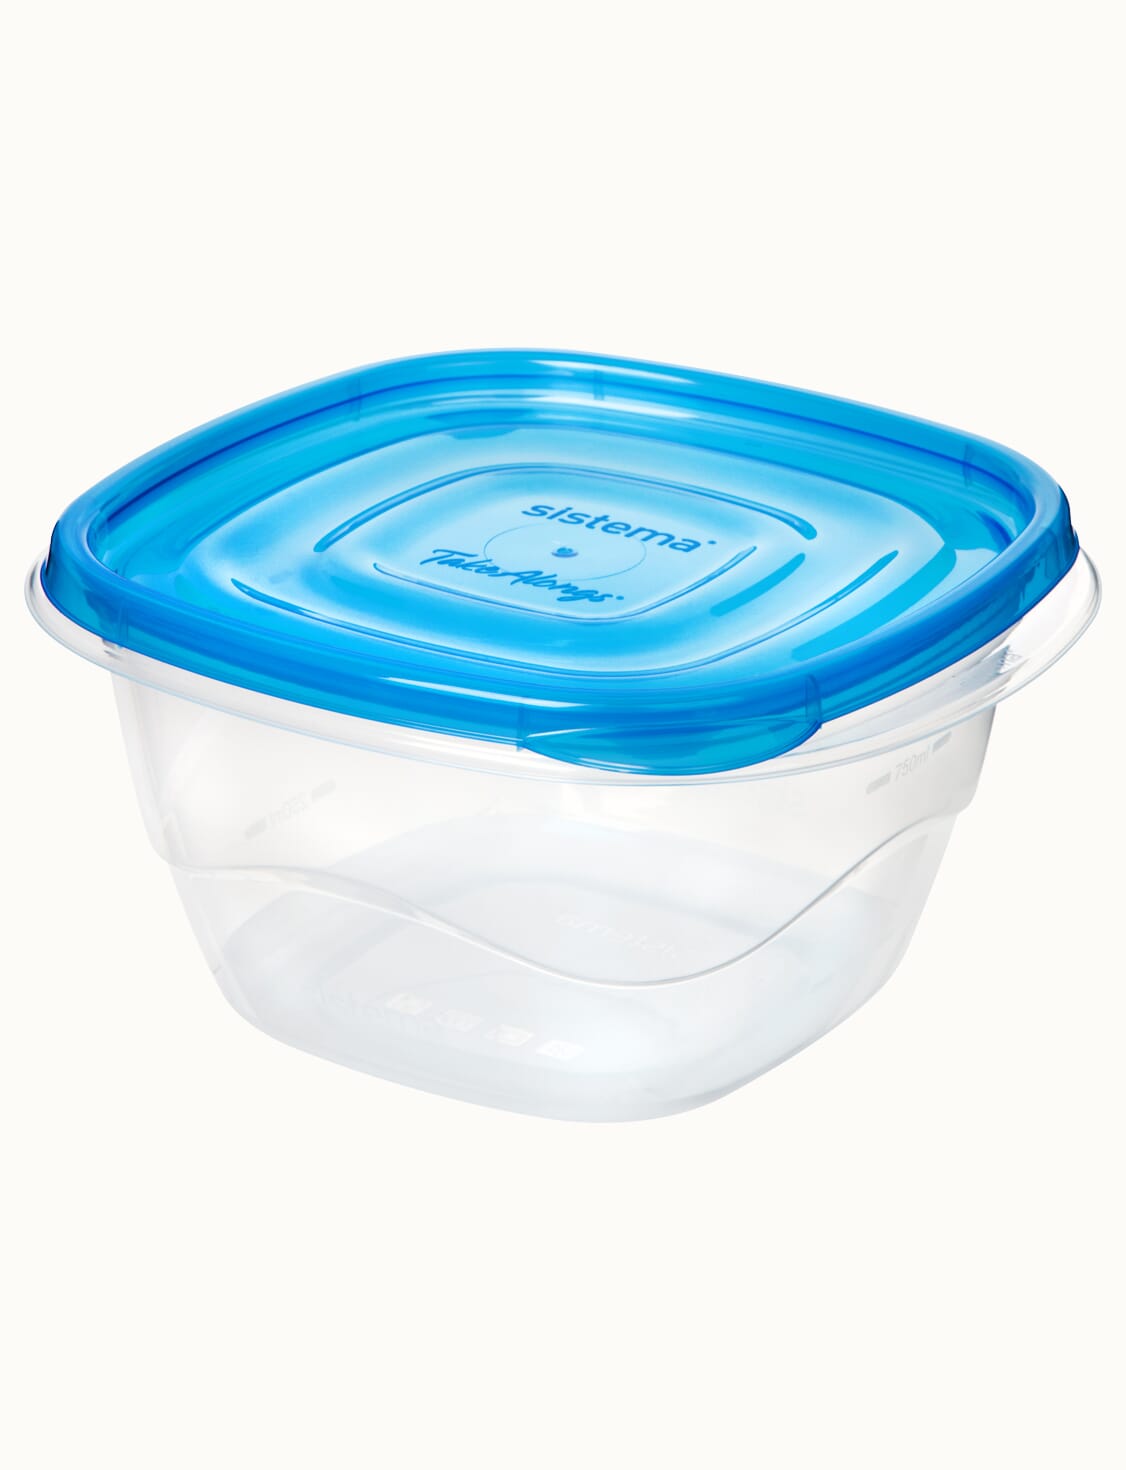 Rubbermaid TakeAlongs Containers & Lids, Deep Squares, 5.2 Cups - 4 containers & lids